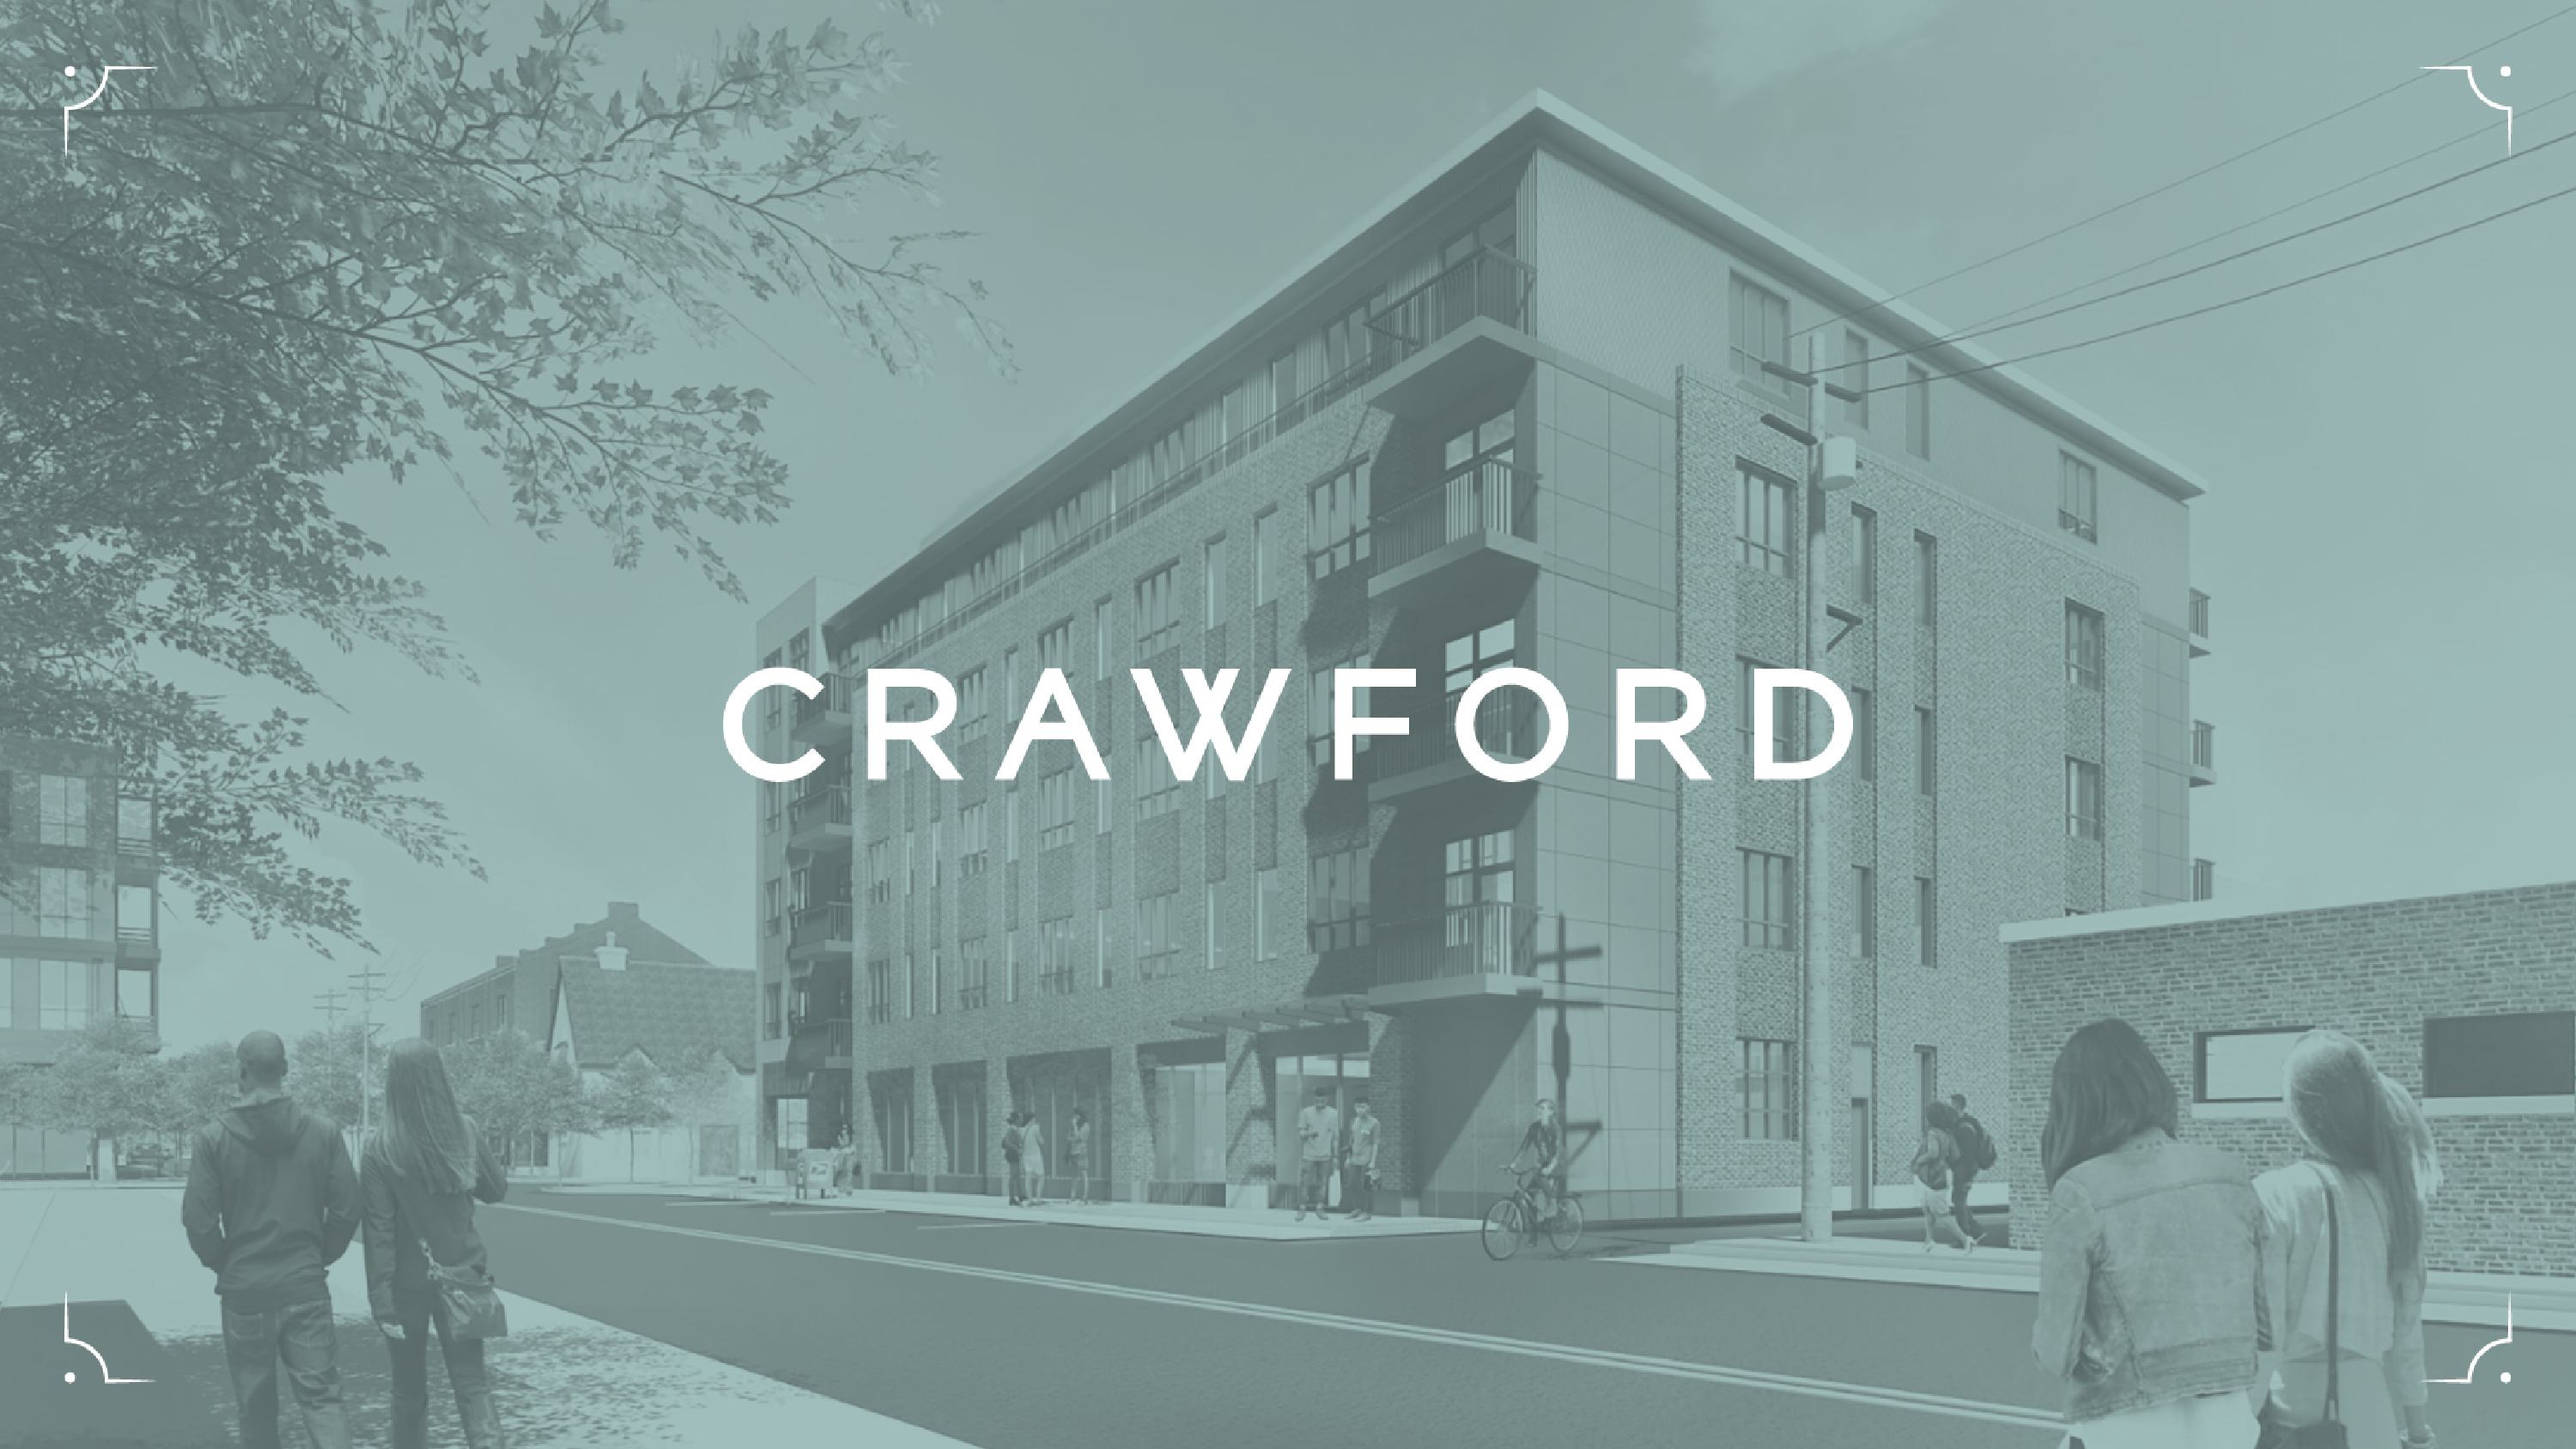 Crawford wordmark against a stylized photo of the building